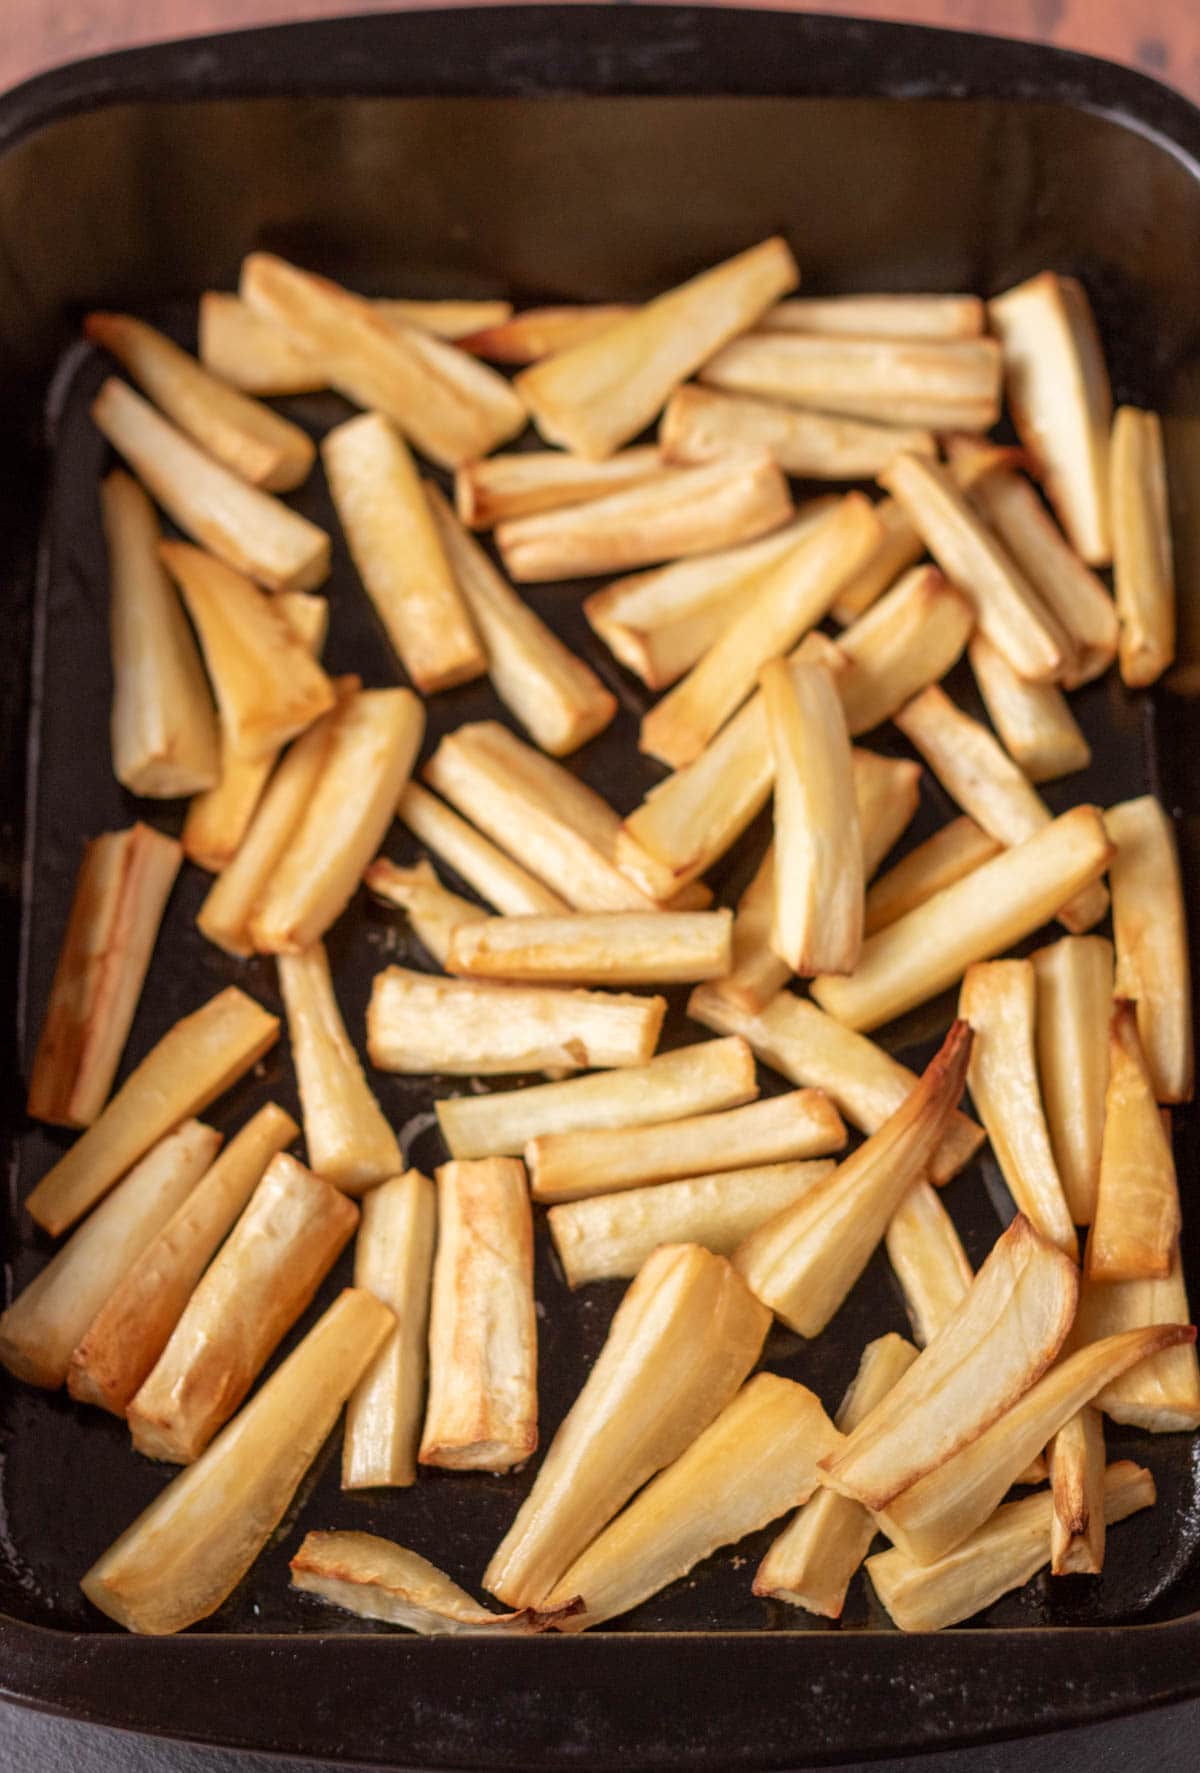 Honey glazed parsnips that have been roasted until browed and crisp in a roasting tin.